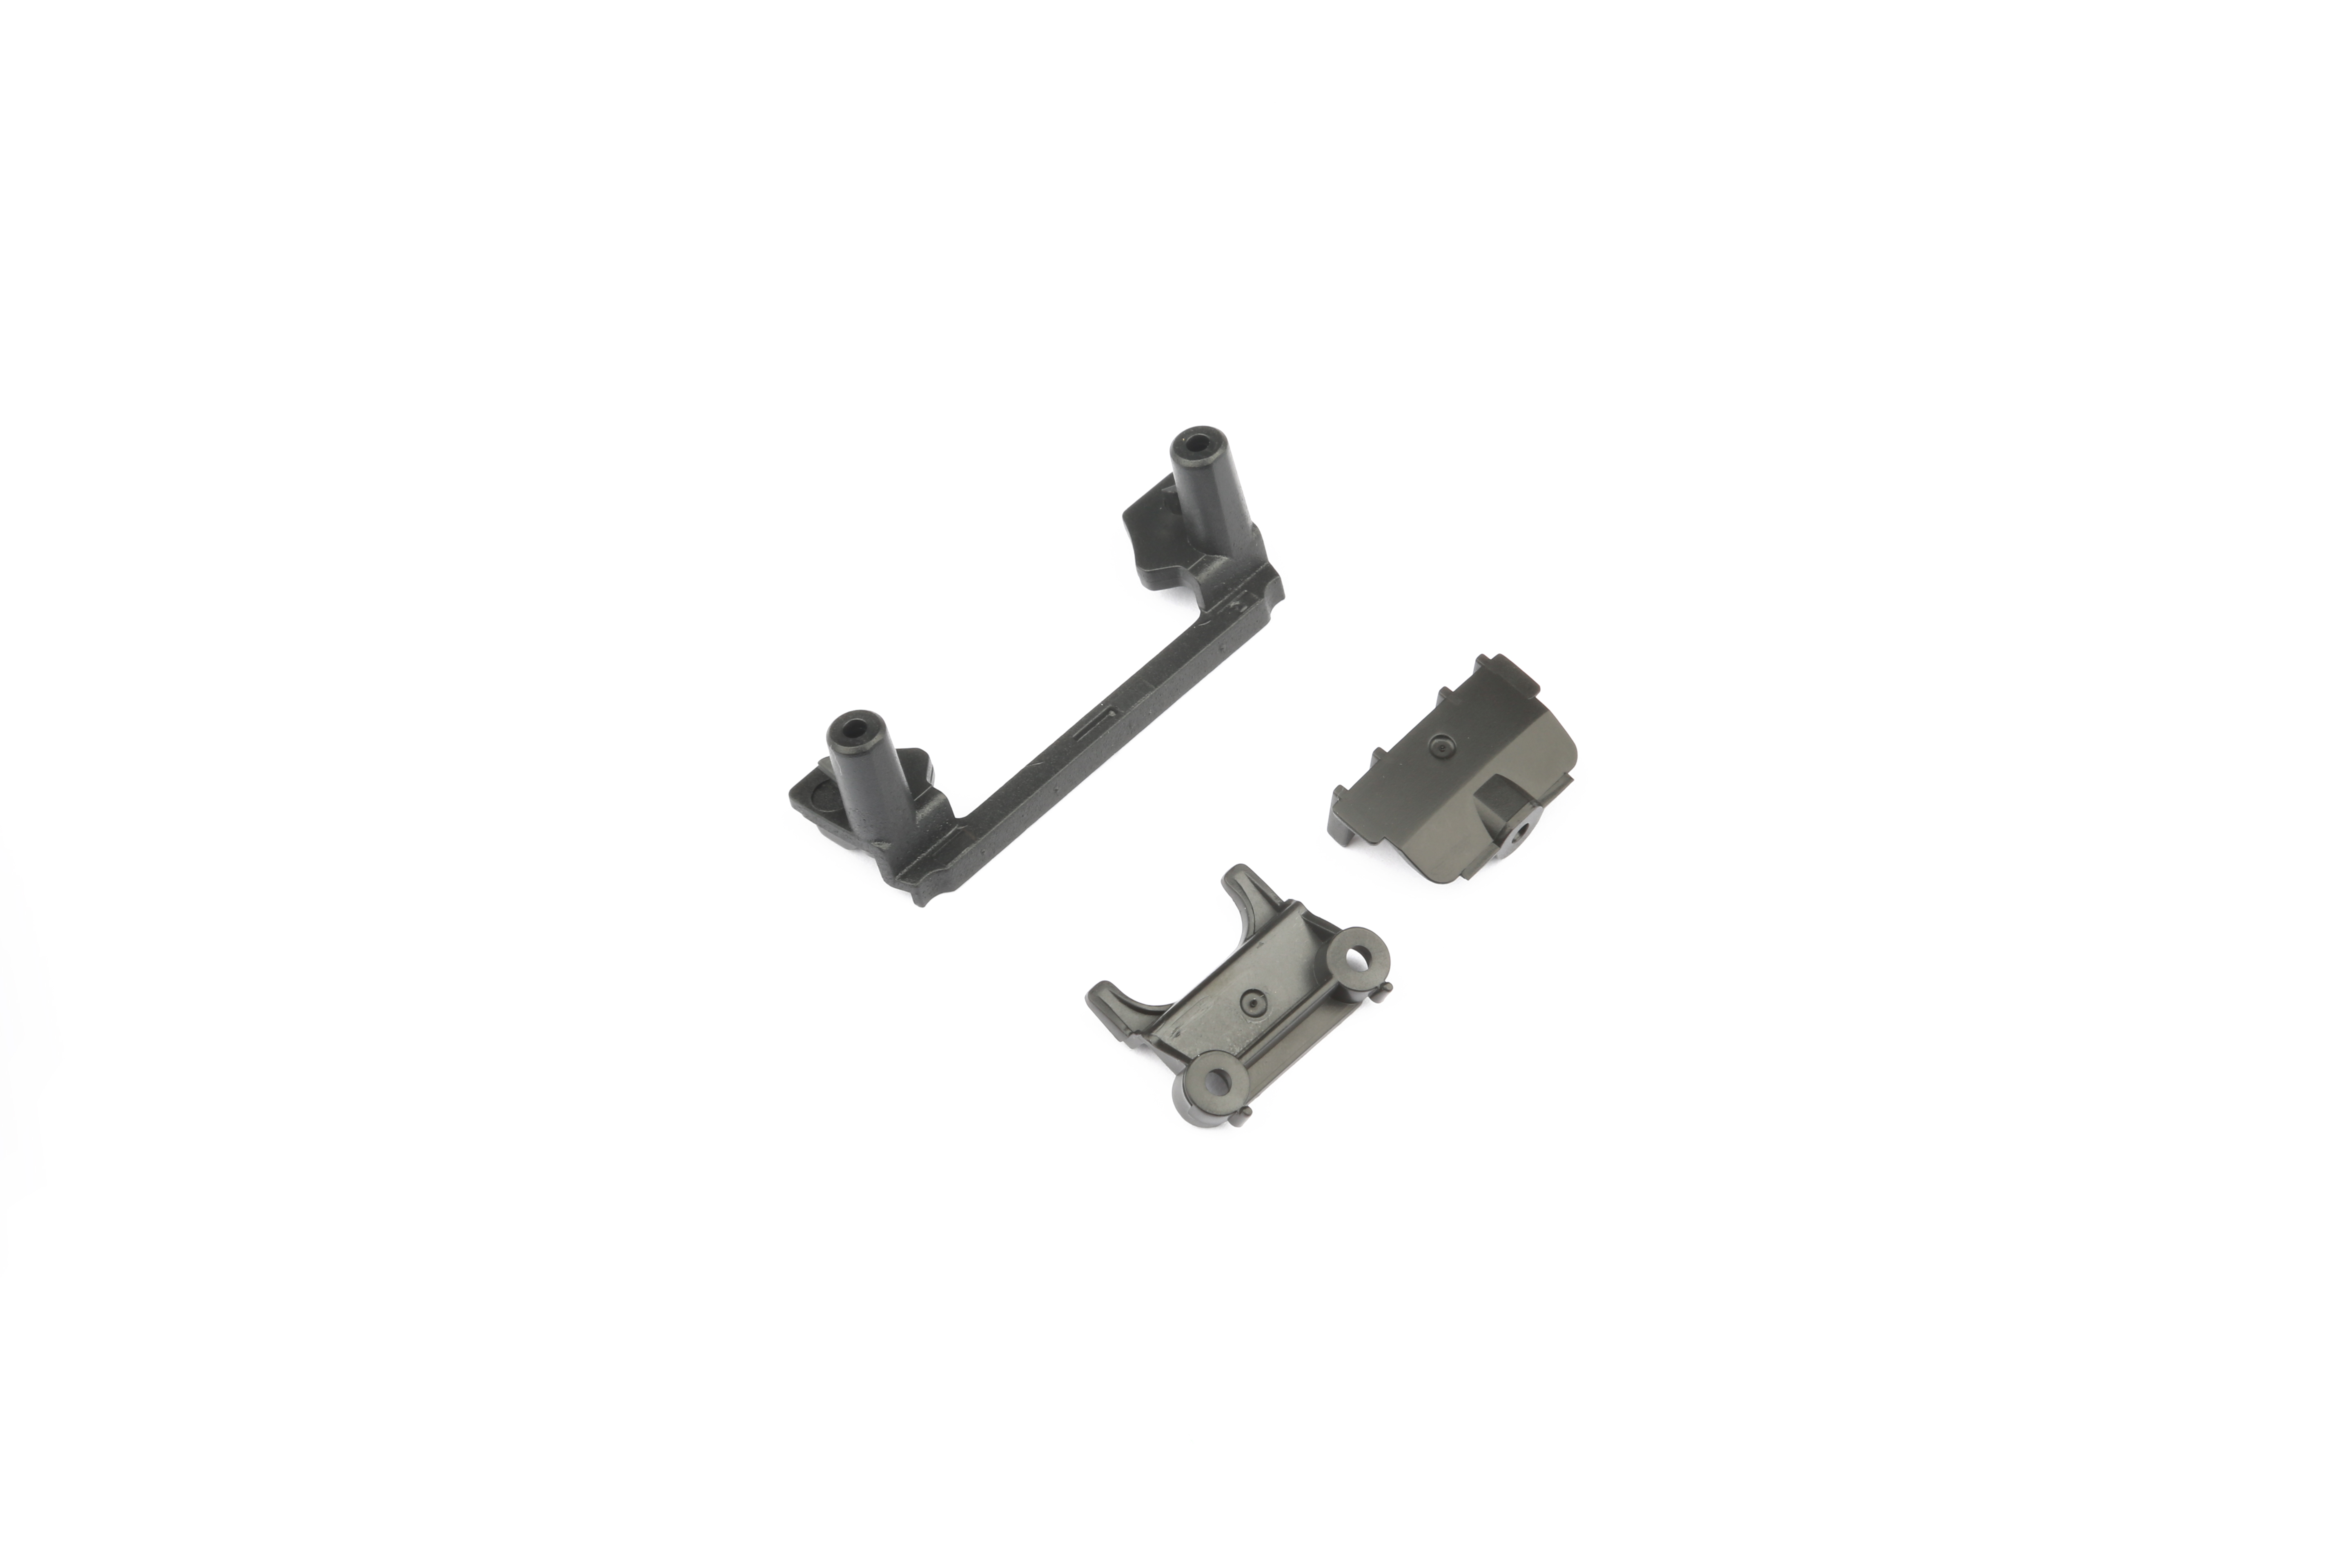 power block,front and rear gimbal anti-separtion （black)